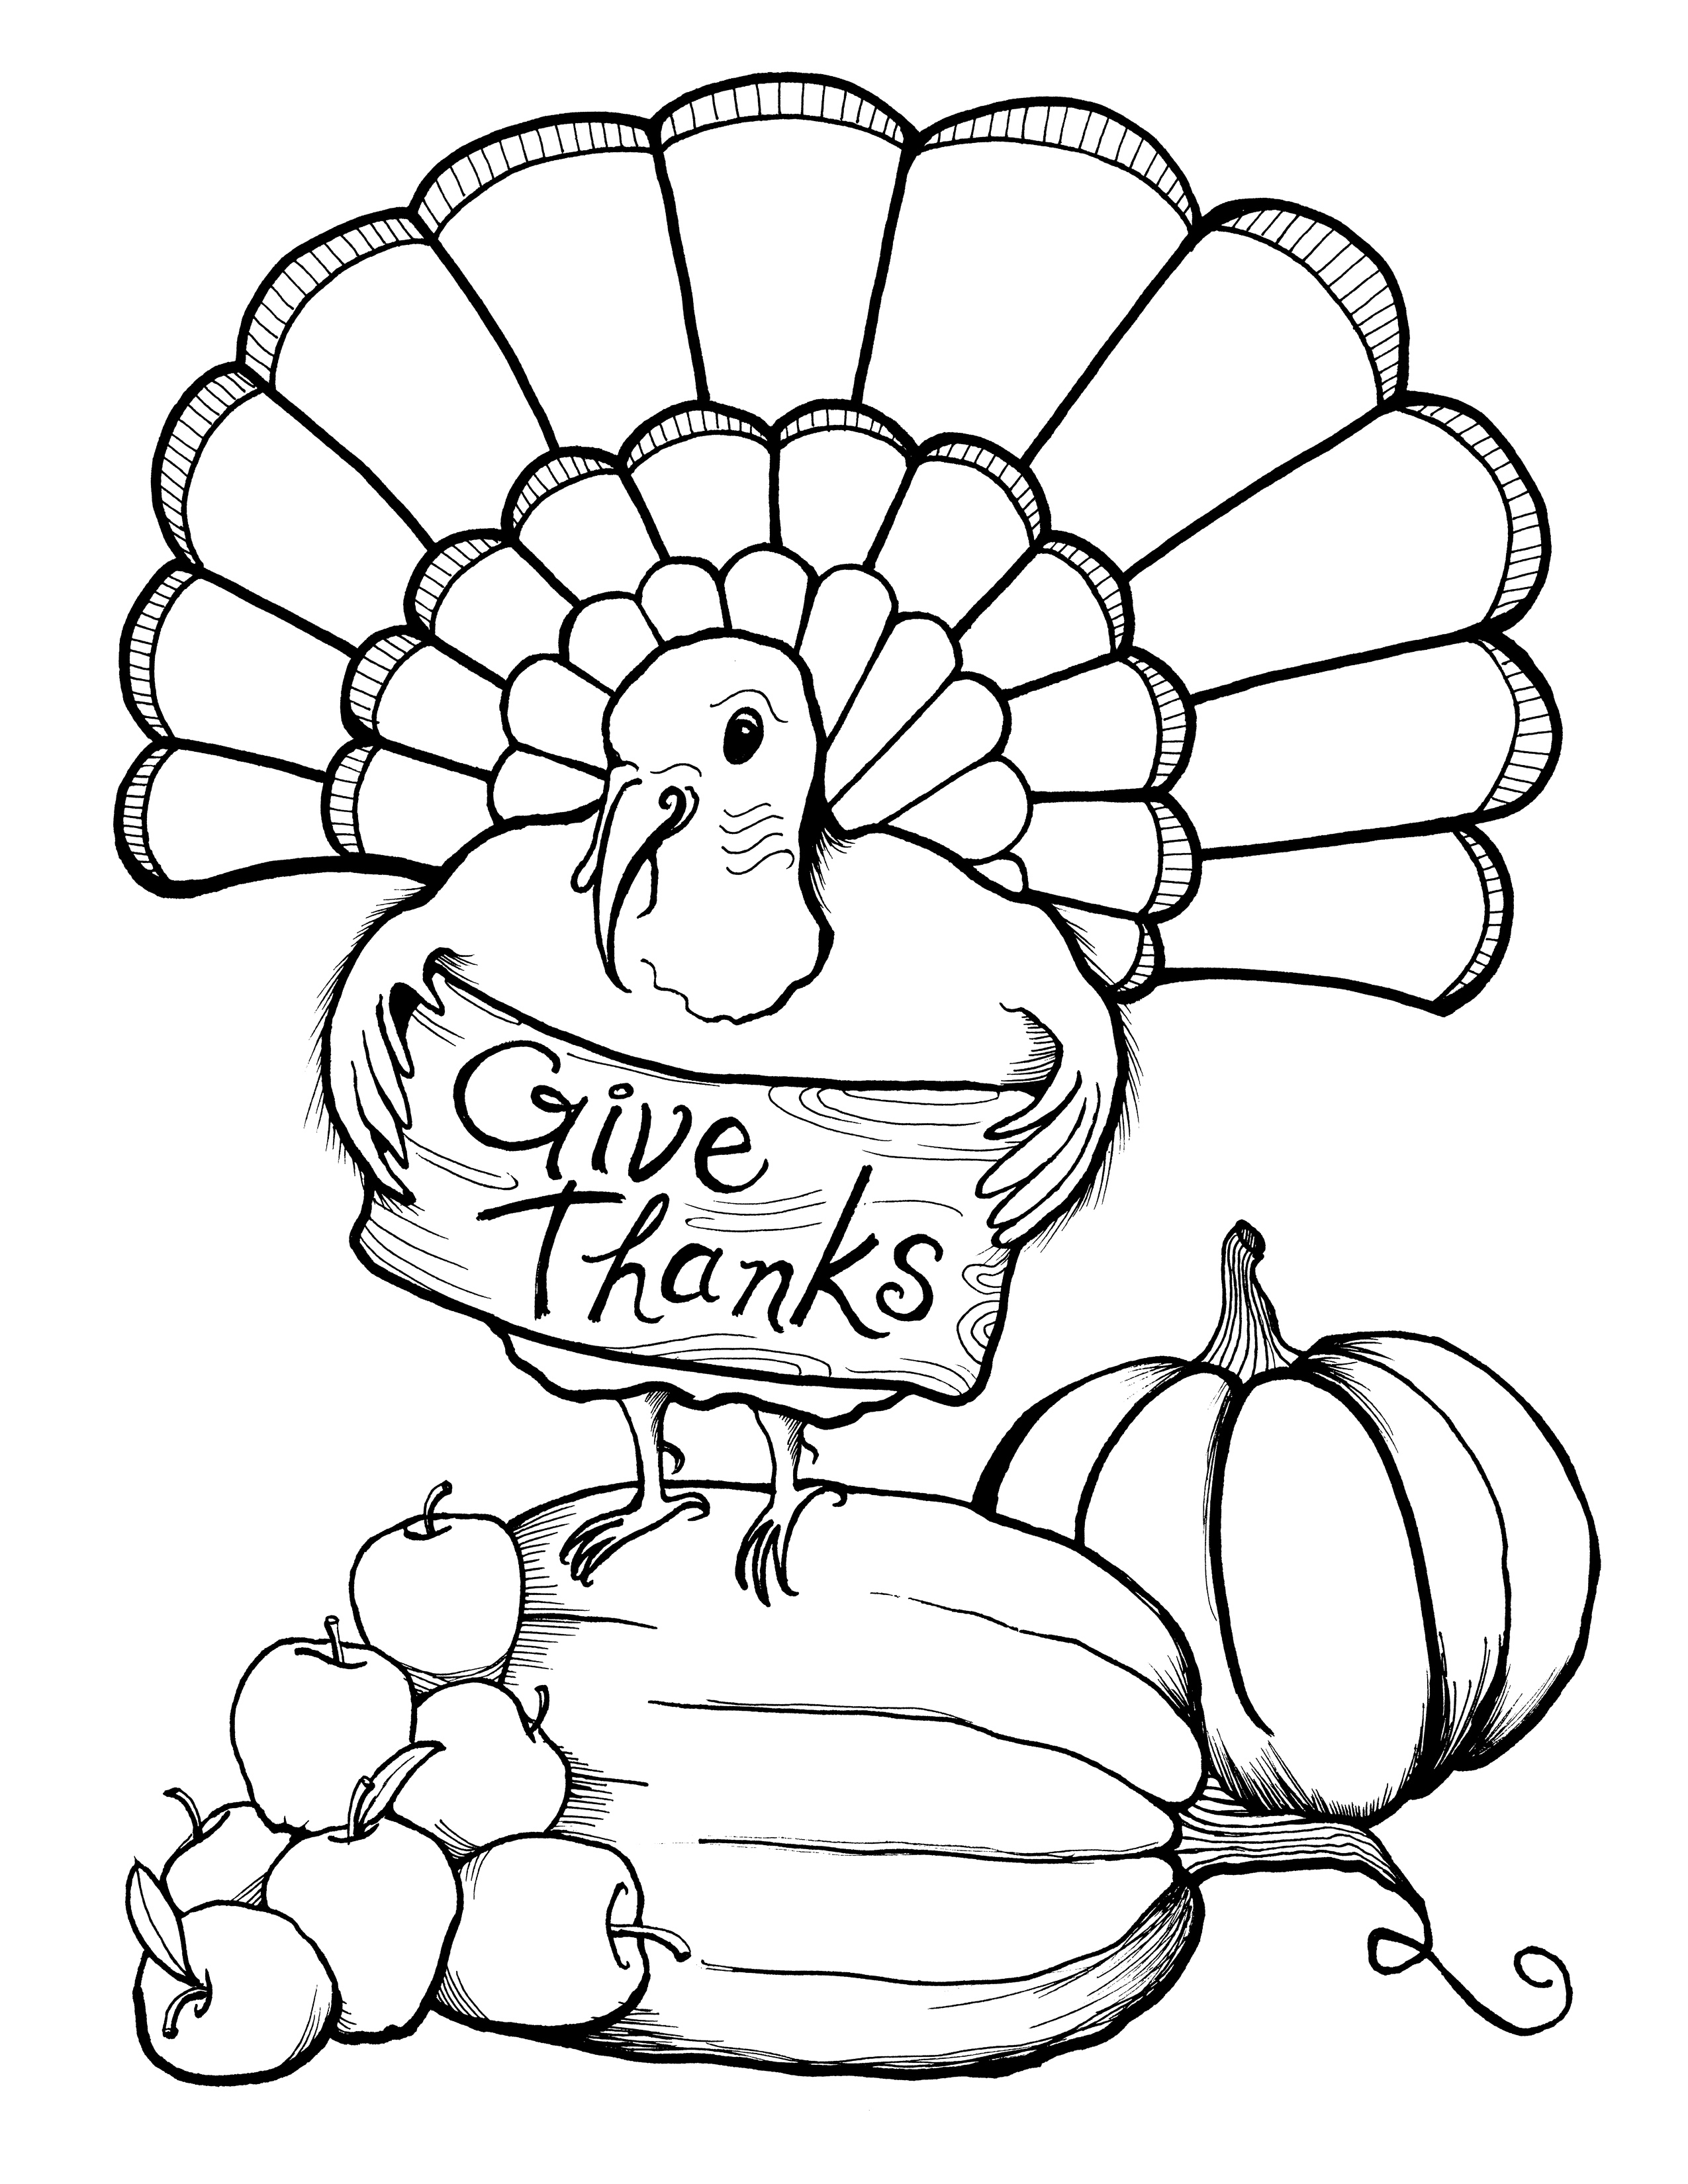 Coloring Pages For Fall And Thanksgiving Printable Coloring Pages